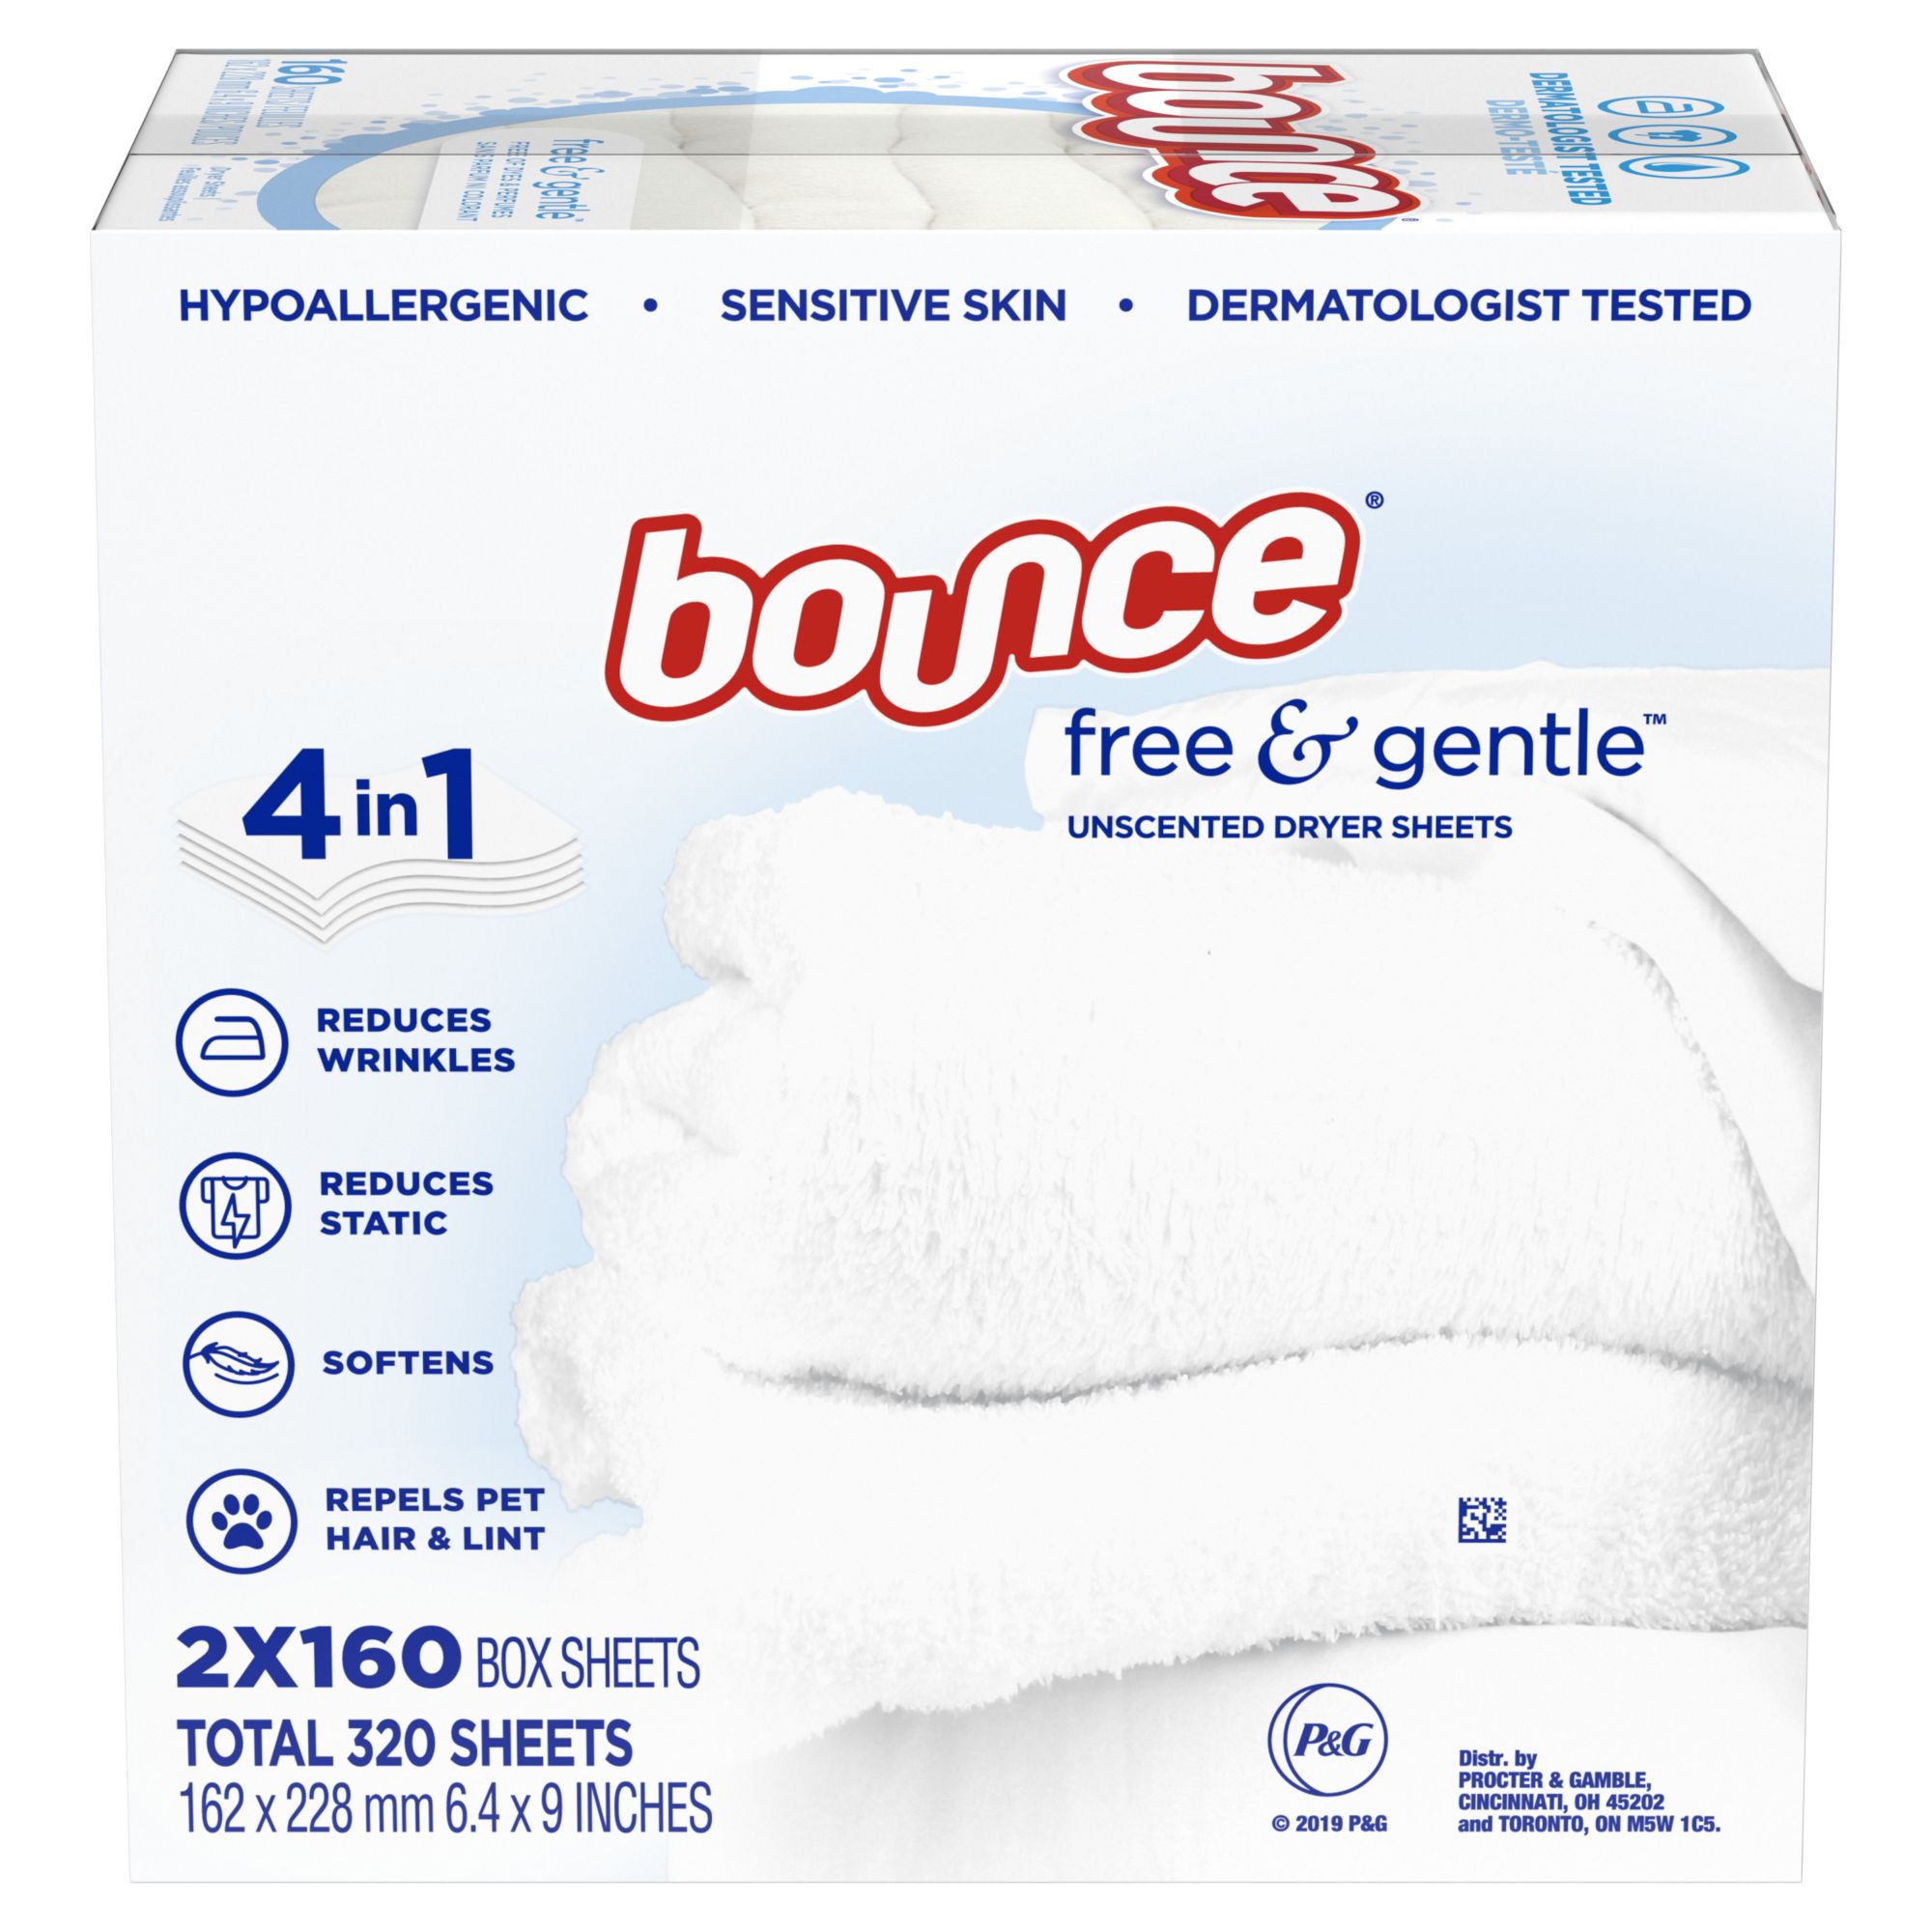 Hypoallergenic Fabric Softener, Dryer Sheets & Other Laundry